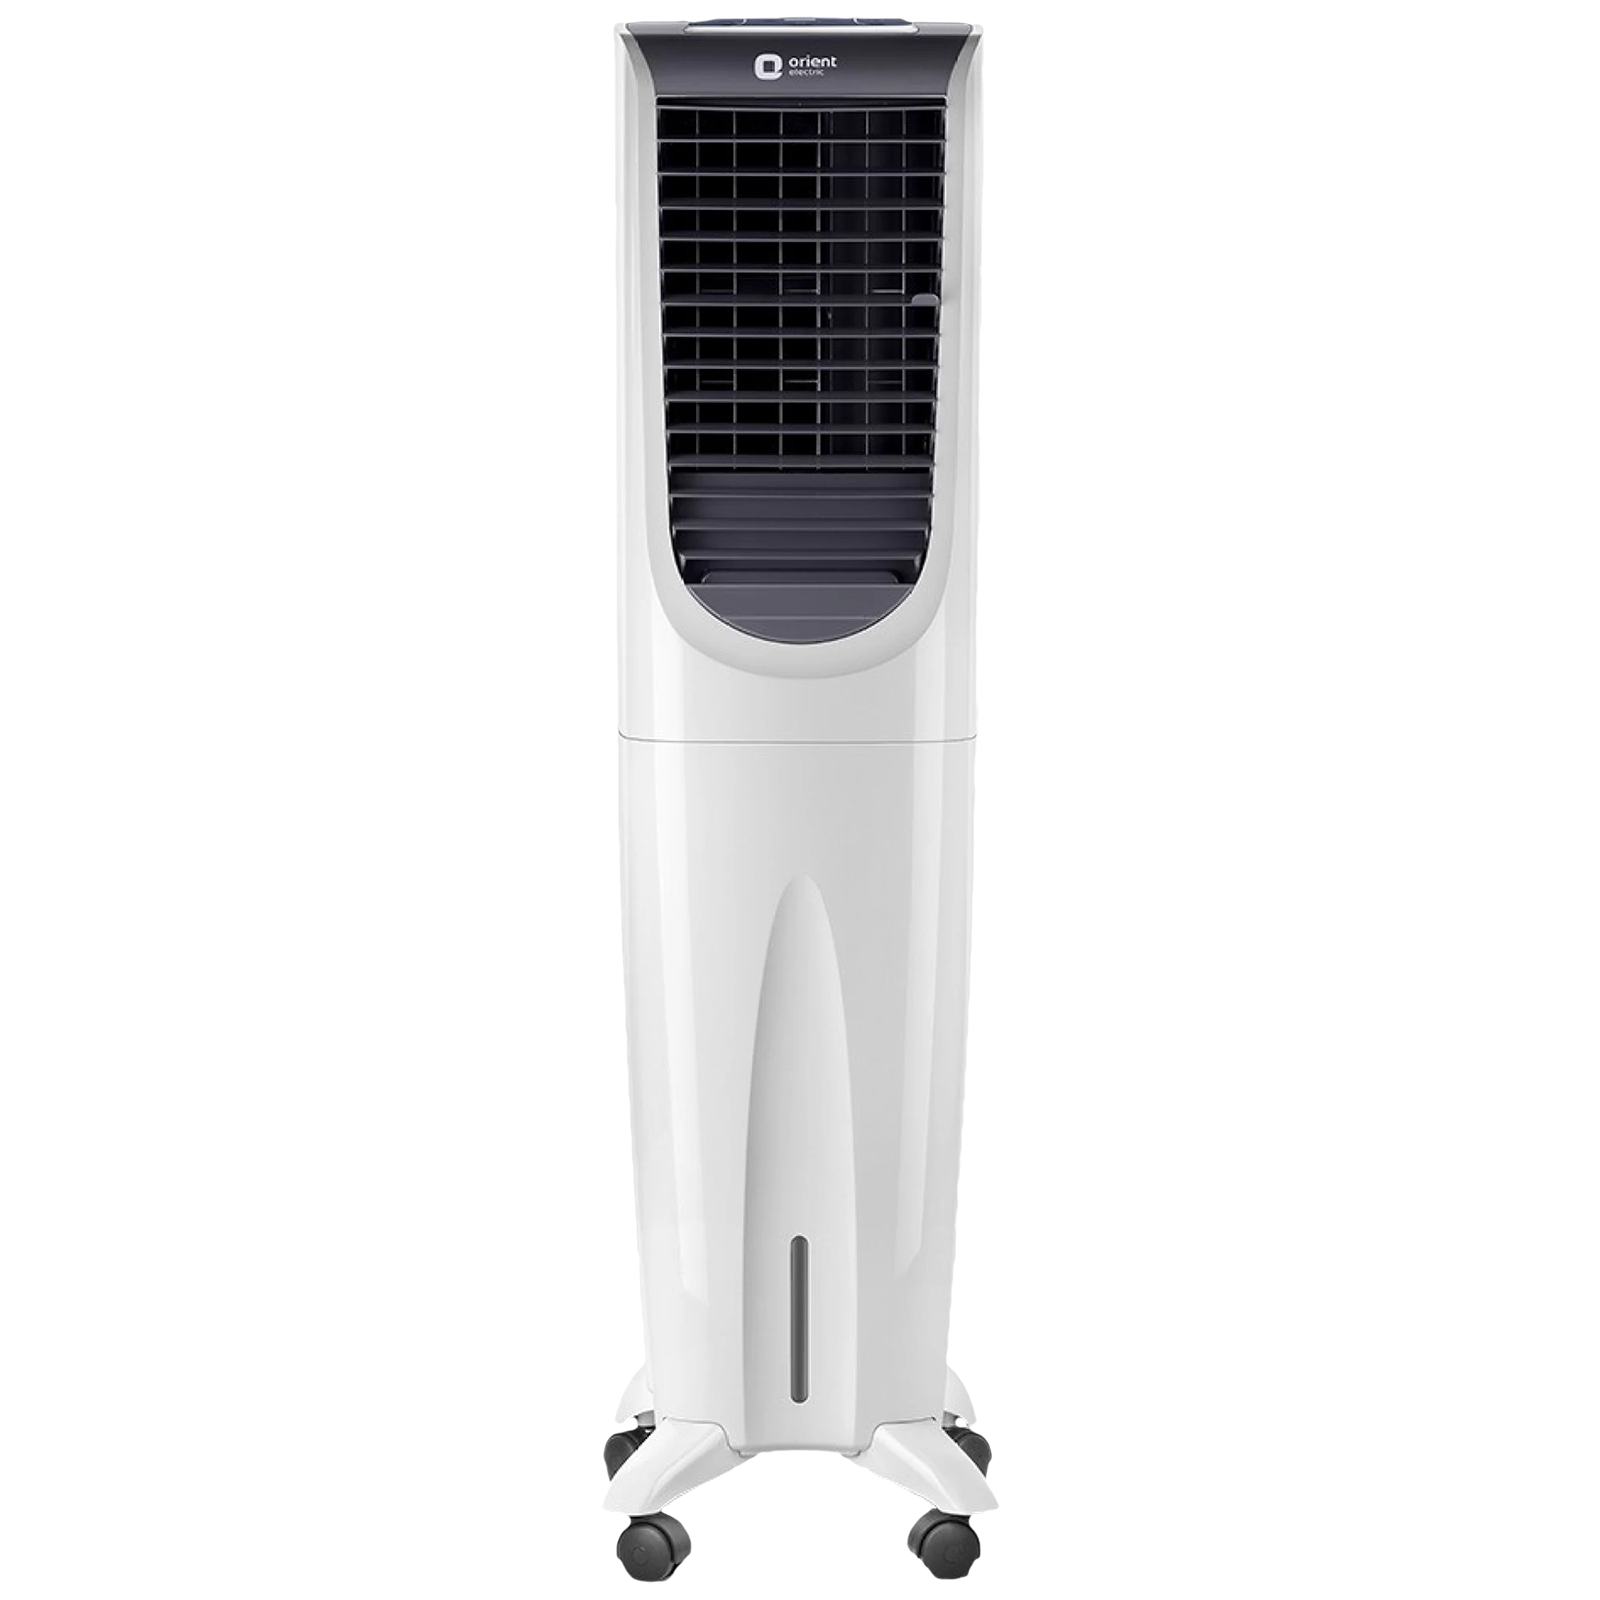 Orient Ultimo 26 Litres Tower Air Cooler with Lot Enabled (Ice Chamber, White)